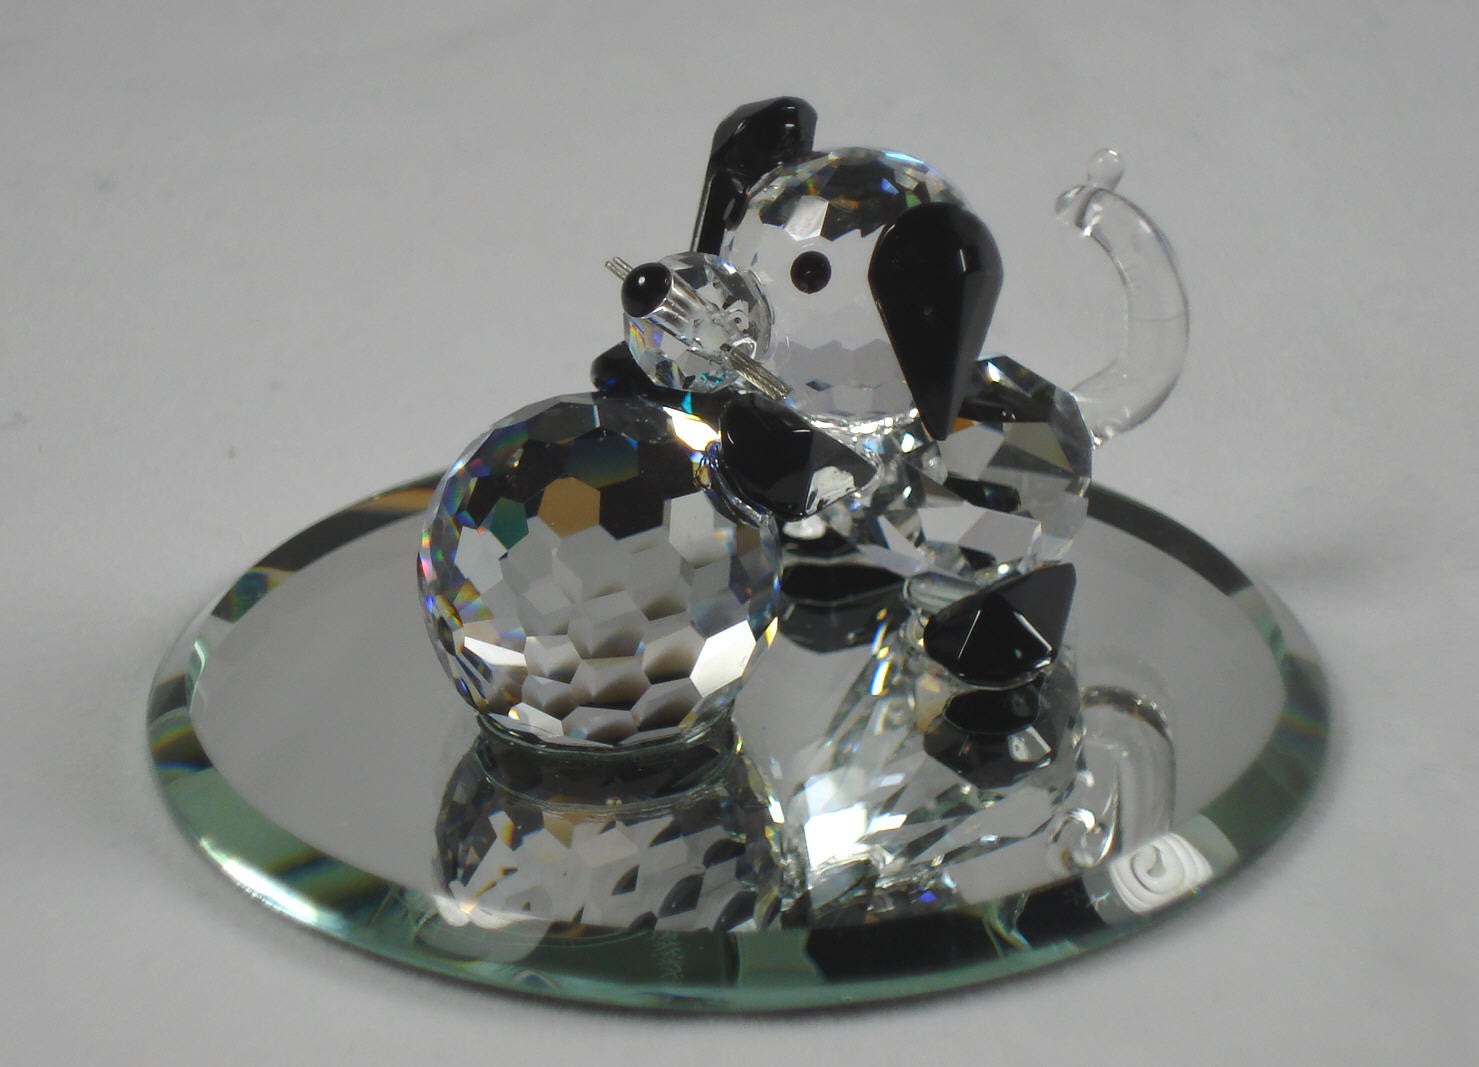 Crystal Puppy With Ball Handcrafted Using Swarovski Crystal - Dog Miniature